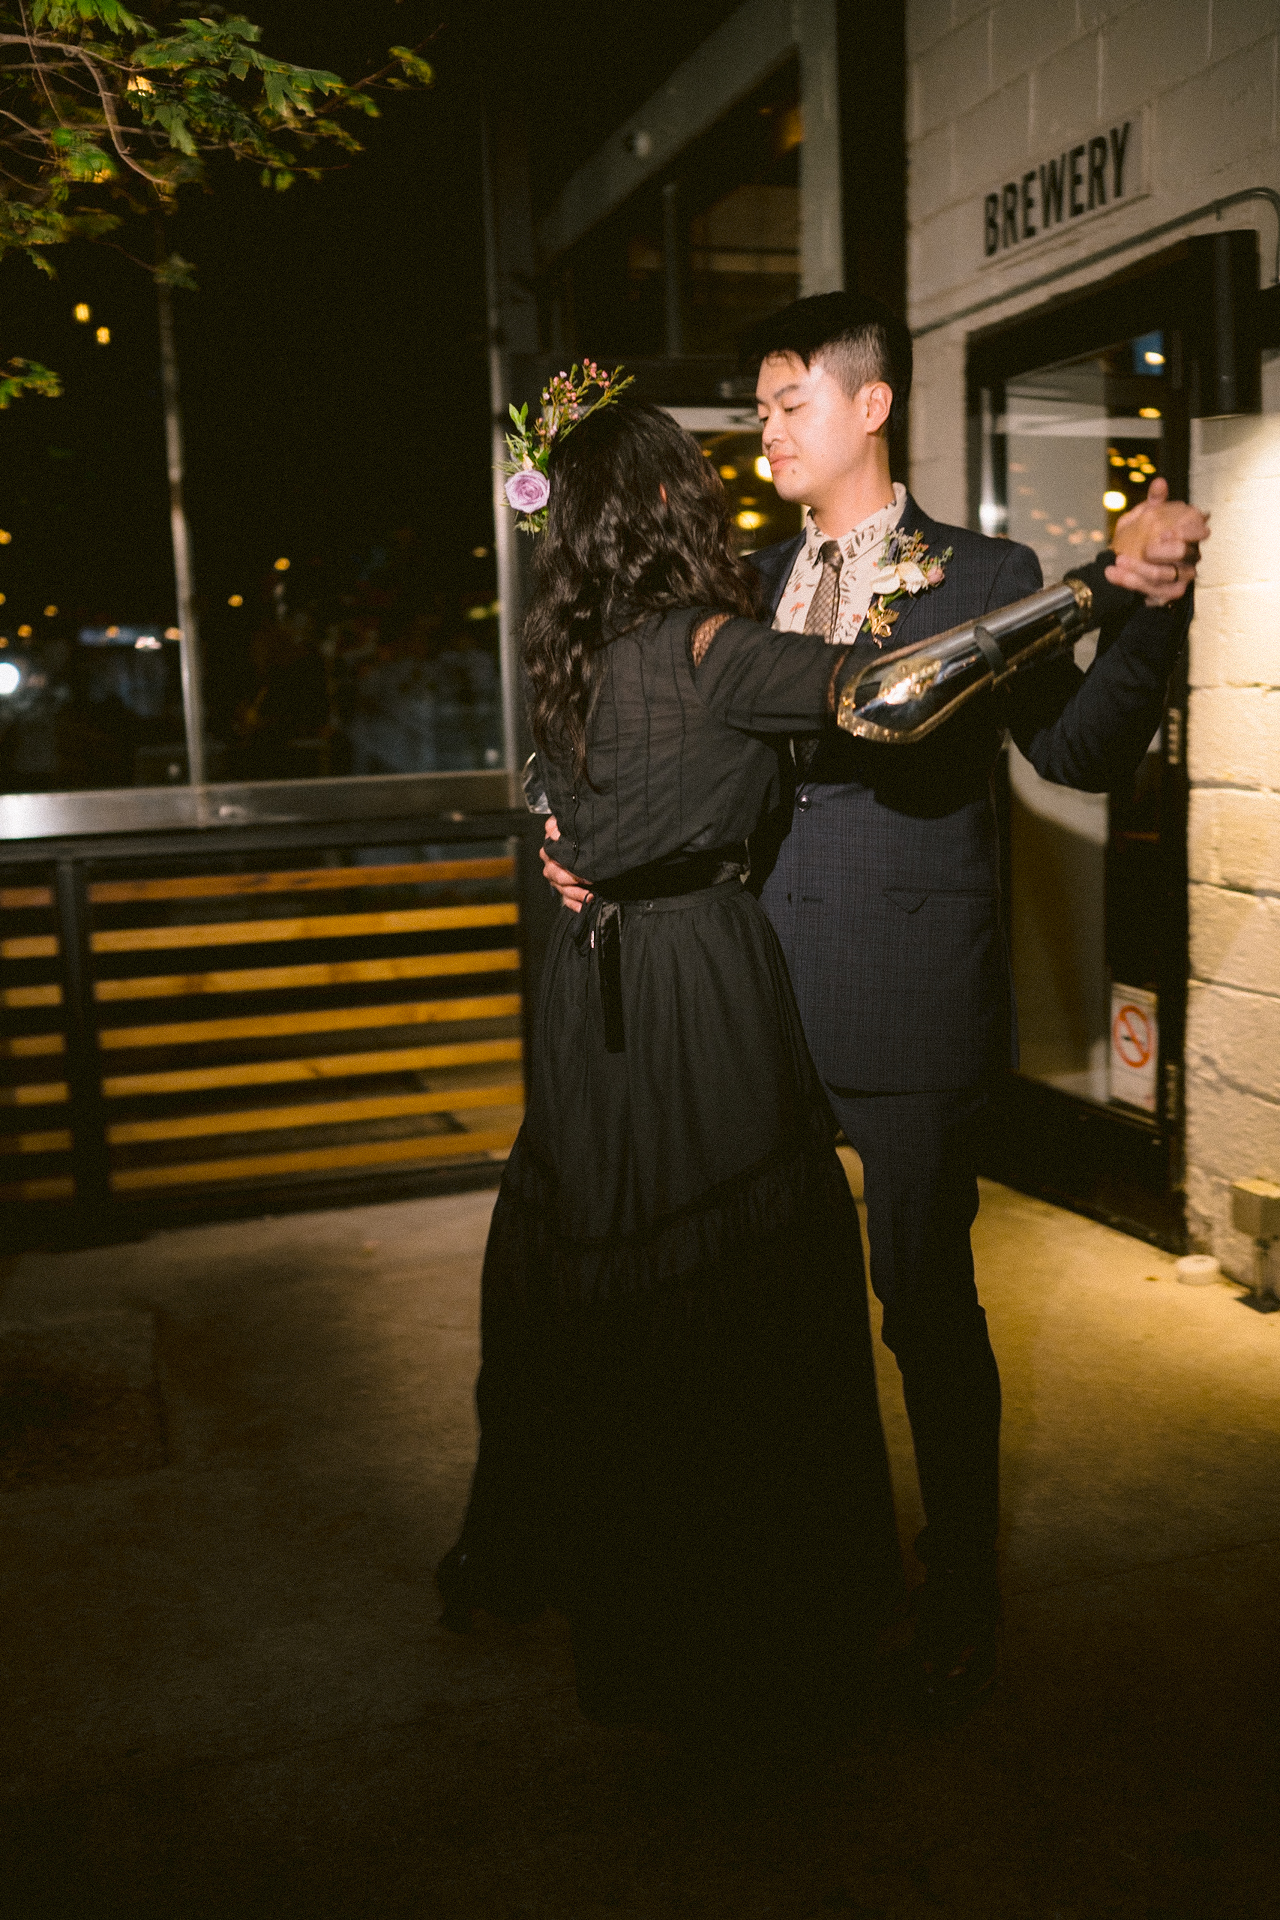 The newlyweds dance romantically at their micro-wedding in Toronto.